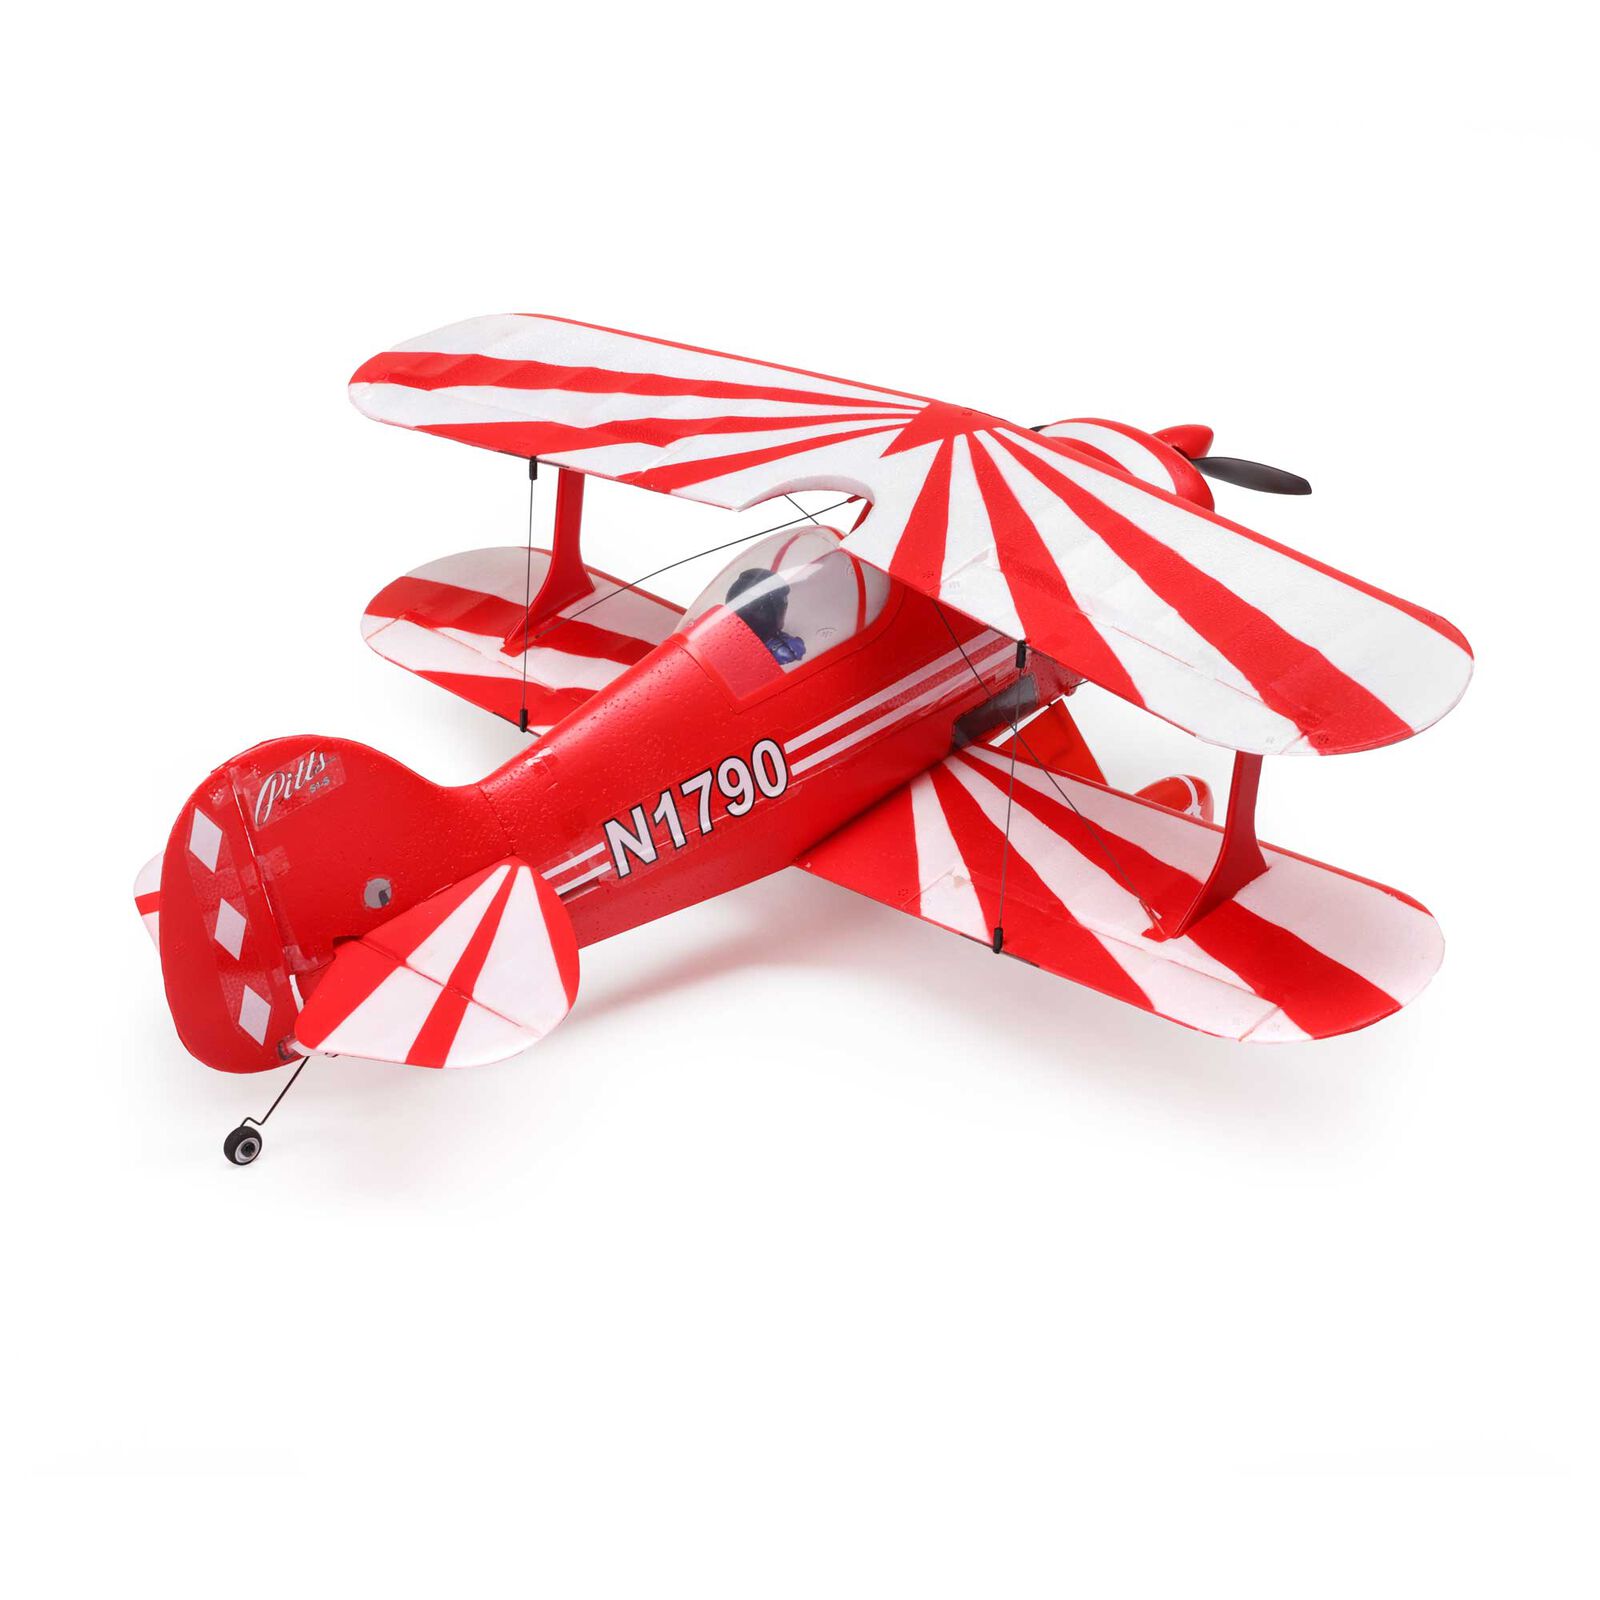 E-flite UMX Pitts S-1S BNF Basic con AS3X &amp; SAFE Select